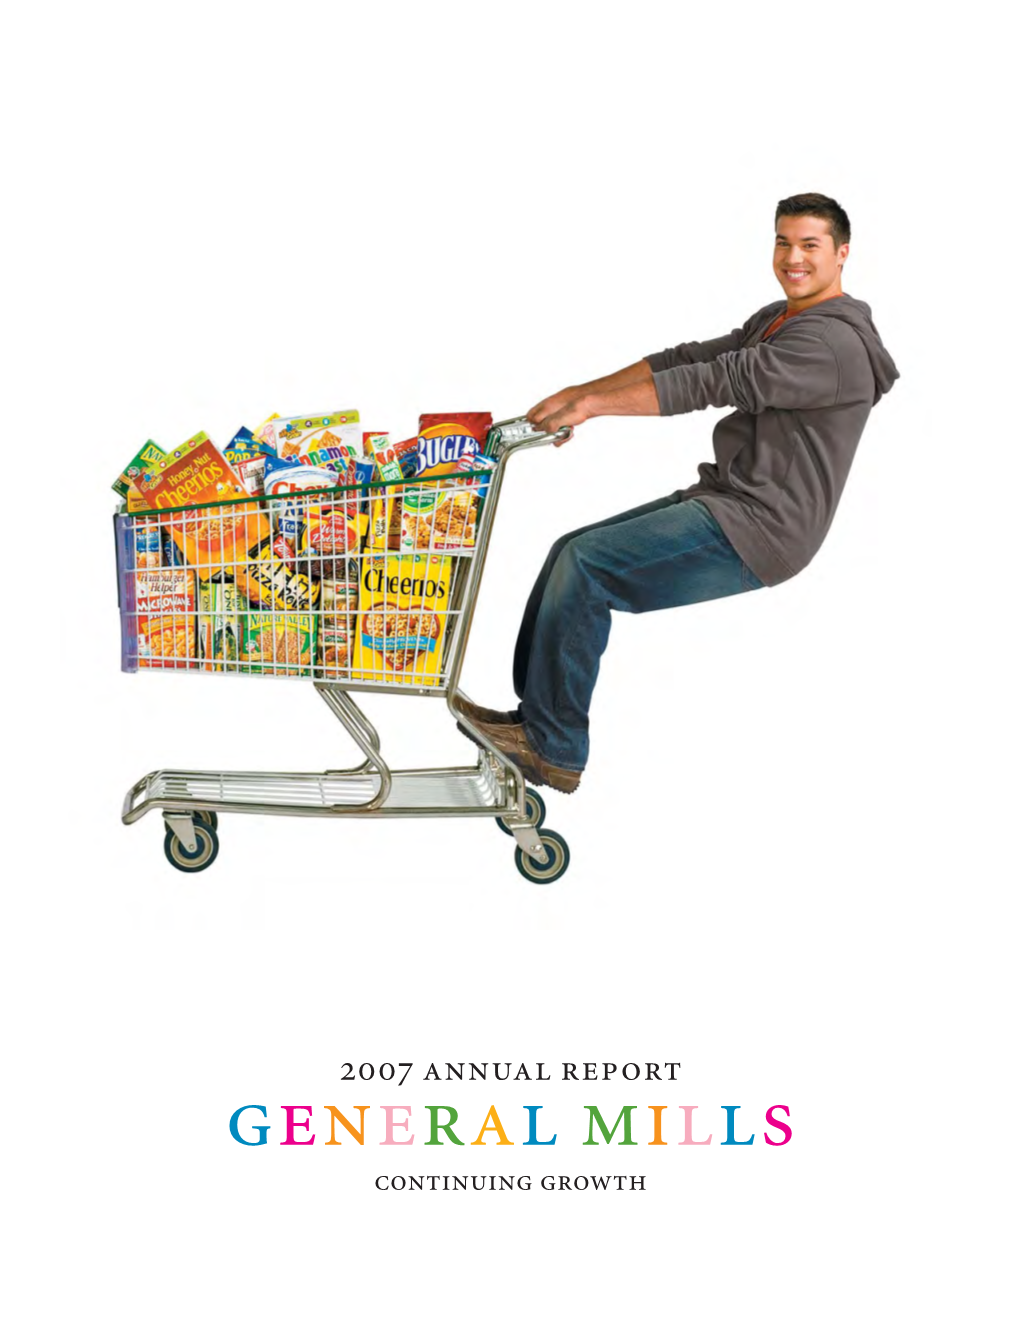 General Mills at a Glance